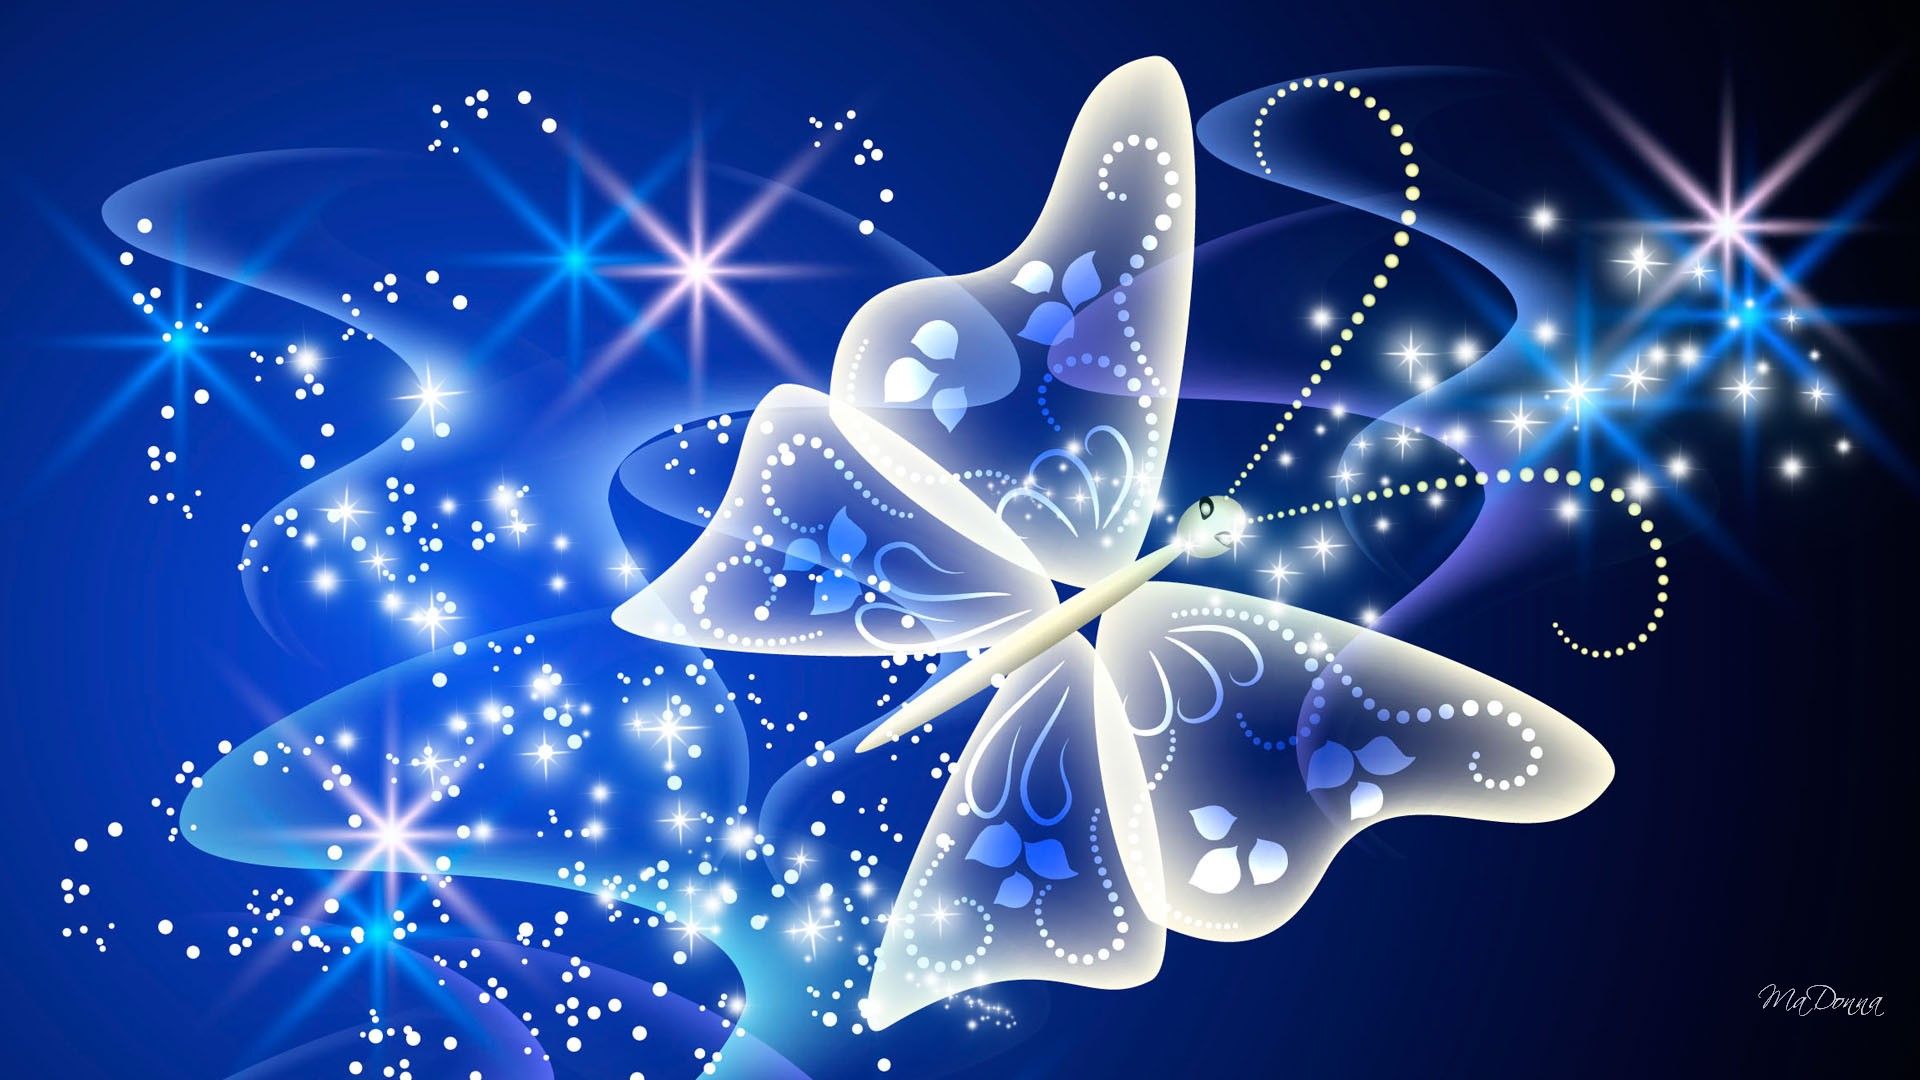 Magical Butterfly Desktop Background wallpaper HD free. Butterfly wallpaper, Blue butterfly wallpaper, Magical picture